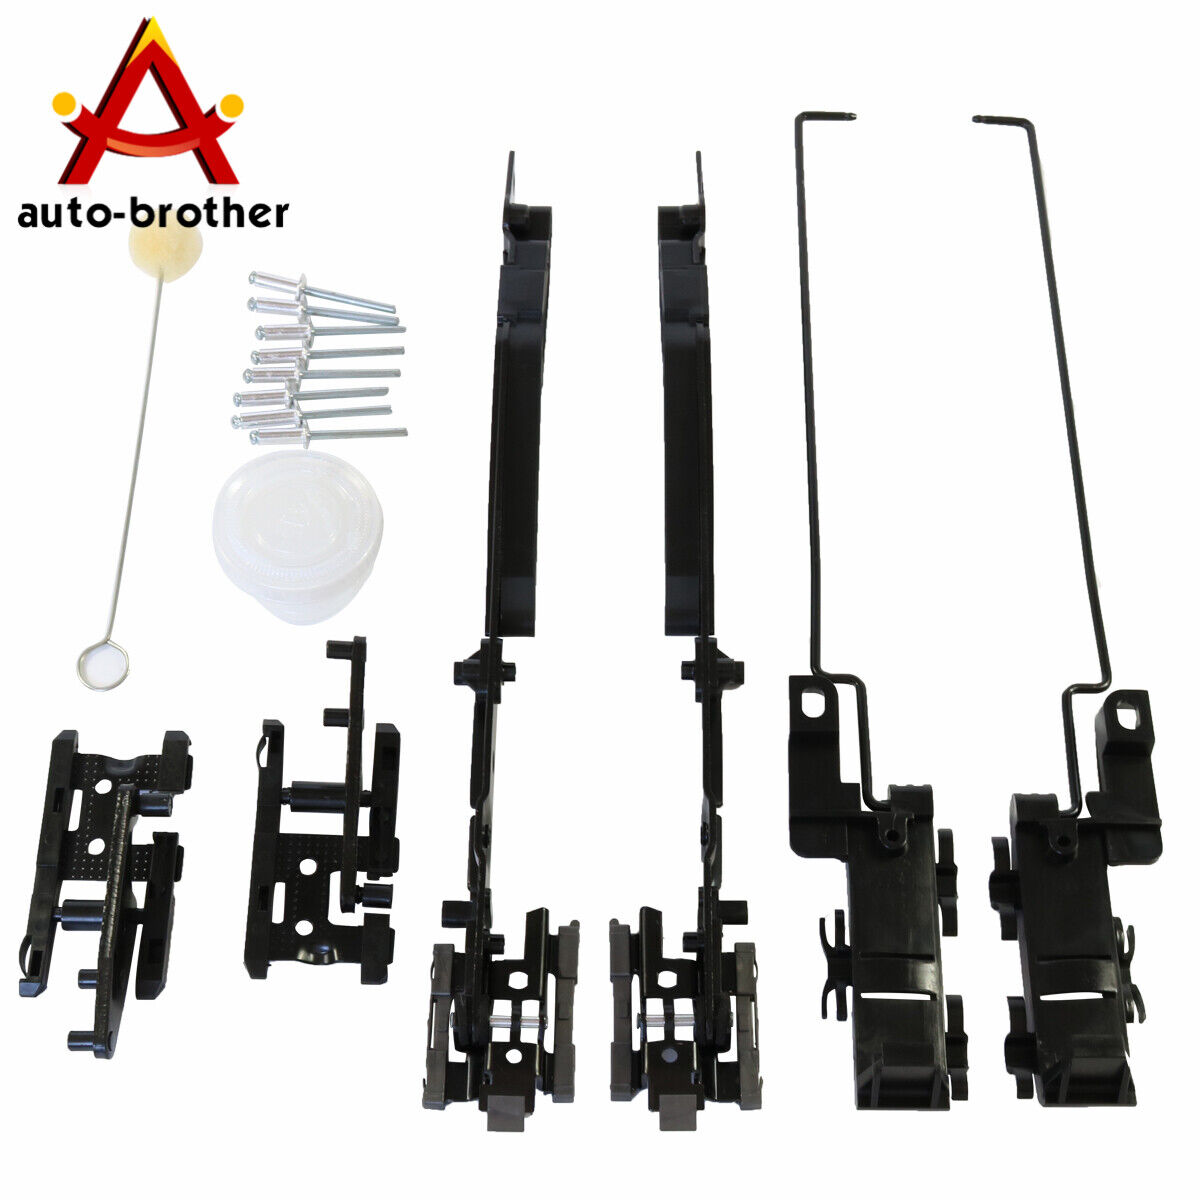 Sunroof Repair Kit cheap Fit For 2000-2014 F2 Expedition NEW before selling F150 Ford